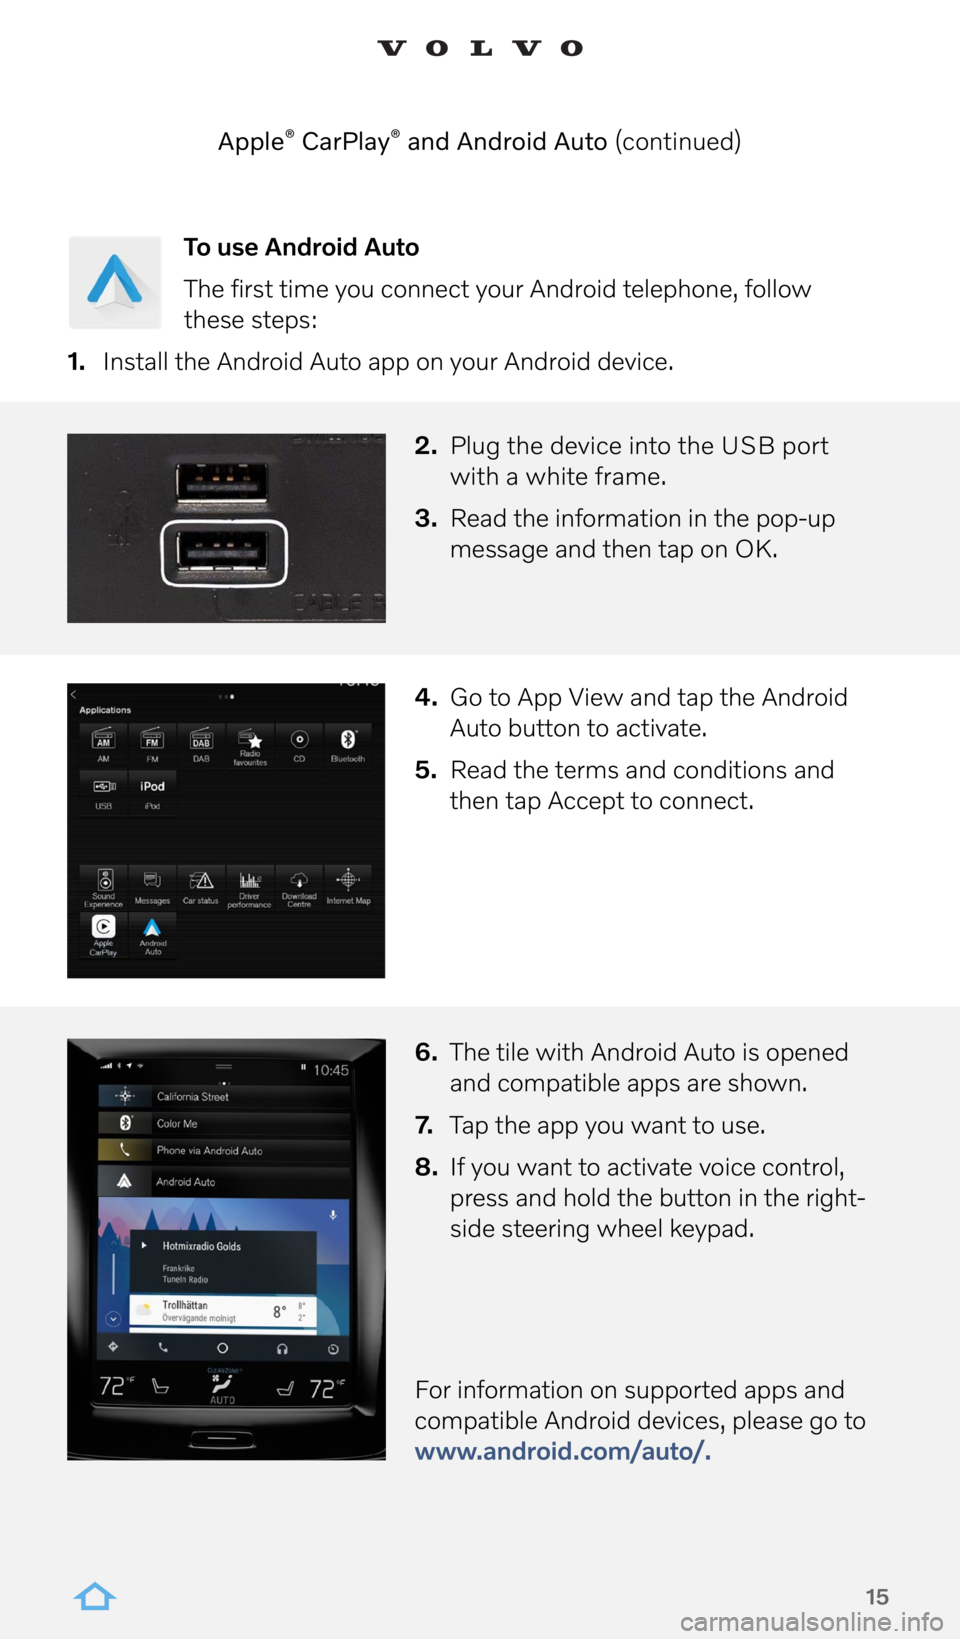 VOLVO XC90 RECHARGE 2022  Sensus Digital Guide 15
To use Android Auto
The first time you connect your Android telephone, follow   
these steps:
1.  Install the Android Auto app on your Android device. 
2. Plug the device into the USB port  
with a